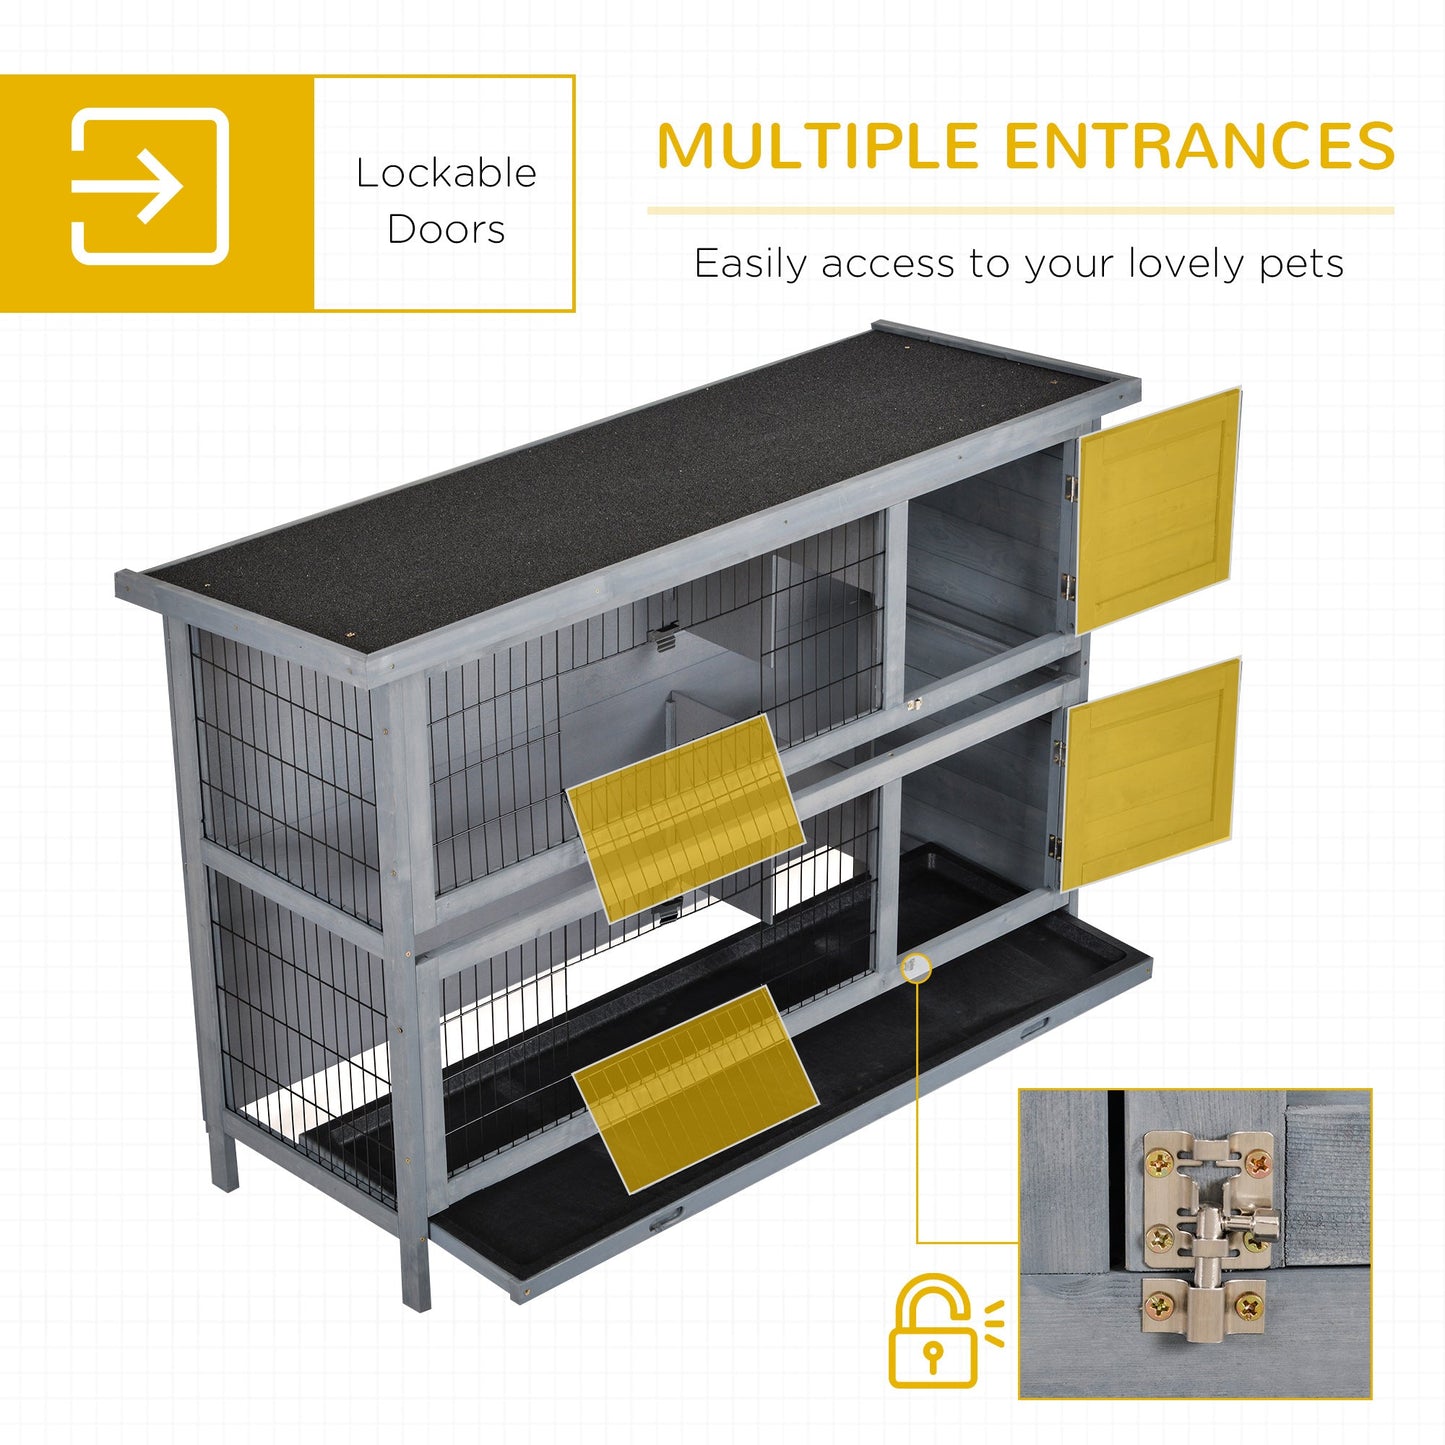 -PawHut 54" 2-Story Large Rabbit Hutch Bunny Cage, Wooden Pet House with Lockable Doors, No Leak Tray and waterproof Roof for Outdoor/Indoor, Gray - Outdoor Style Company